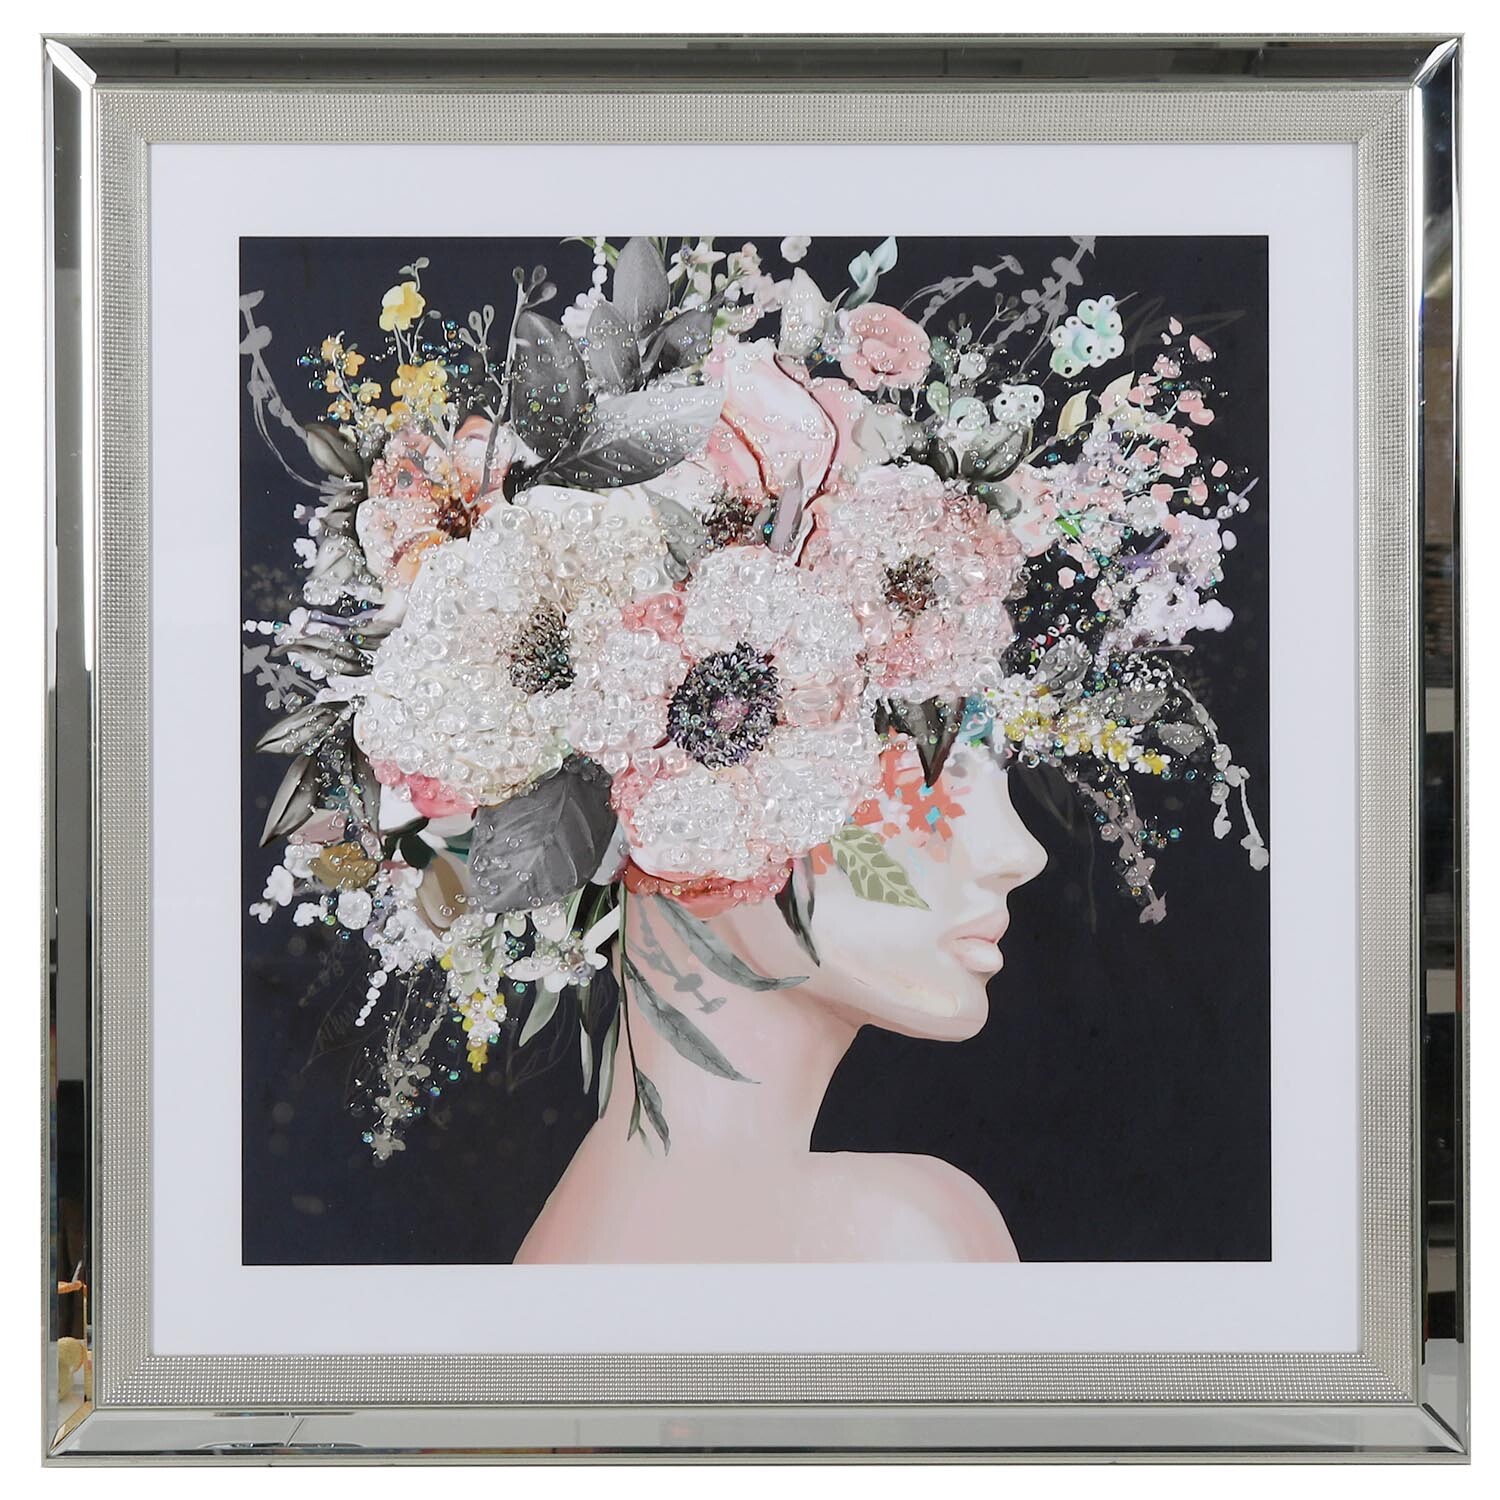 Floral Thoughts Jewelled Framed Wall Art 69 x 69cm Image